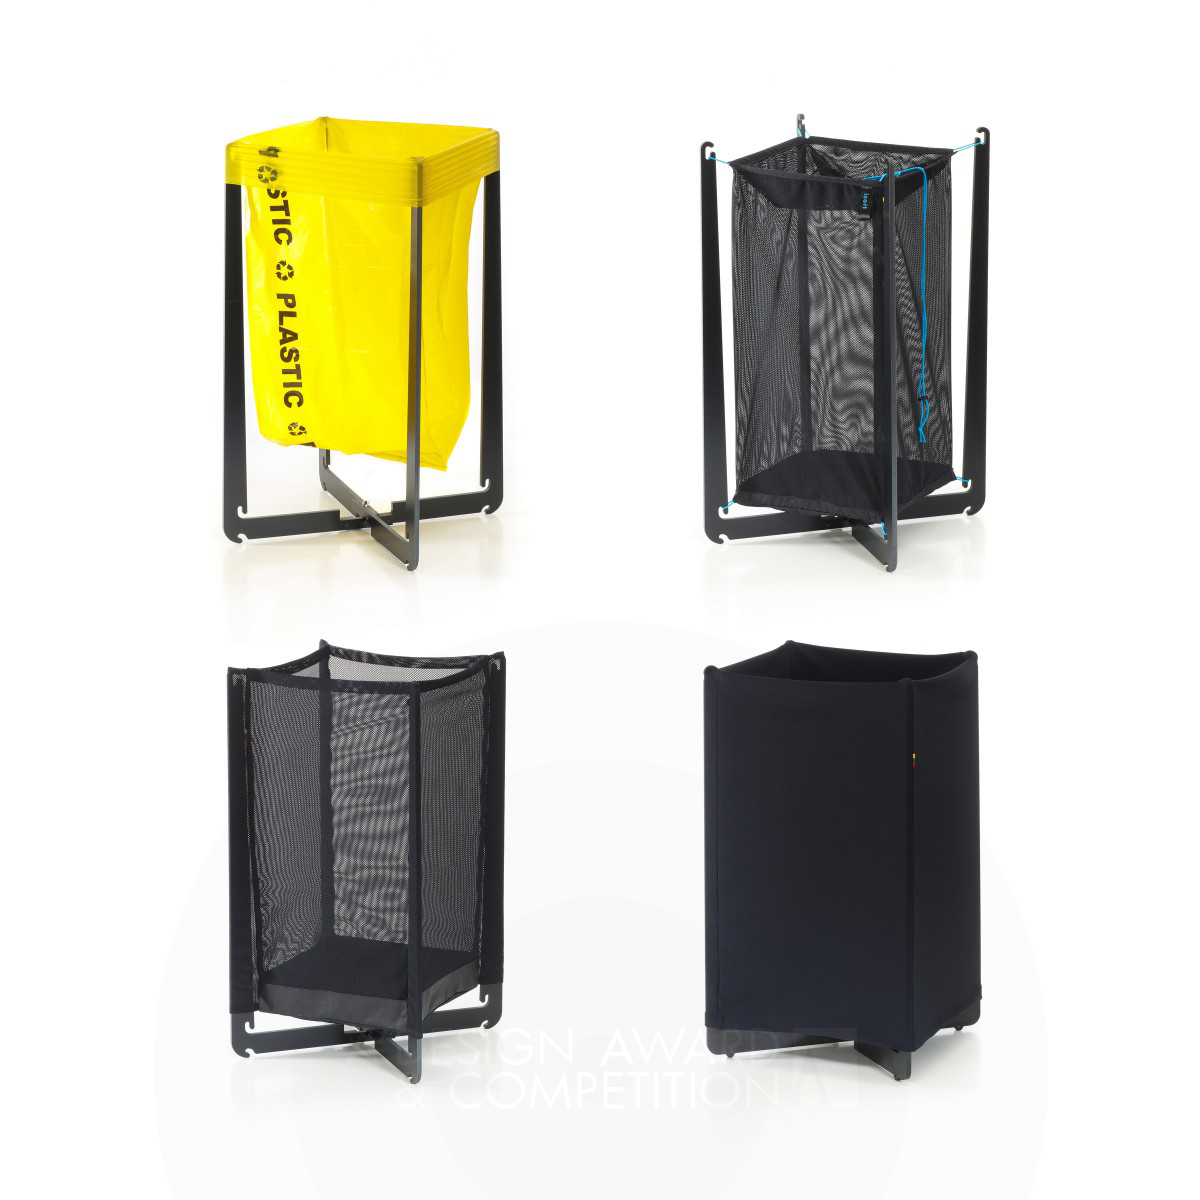 Spider Bin <b>Recyclable Waste Sorting System